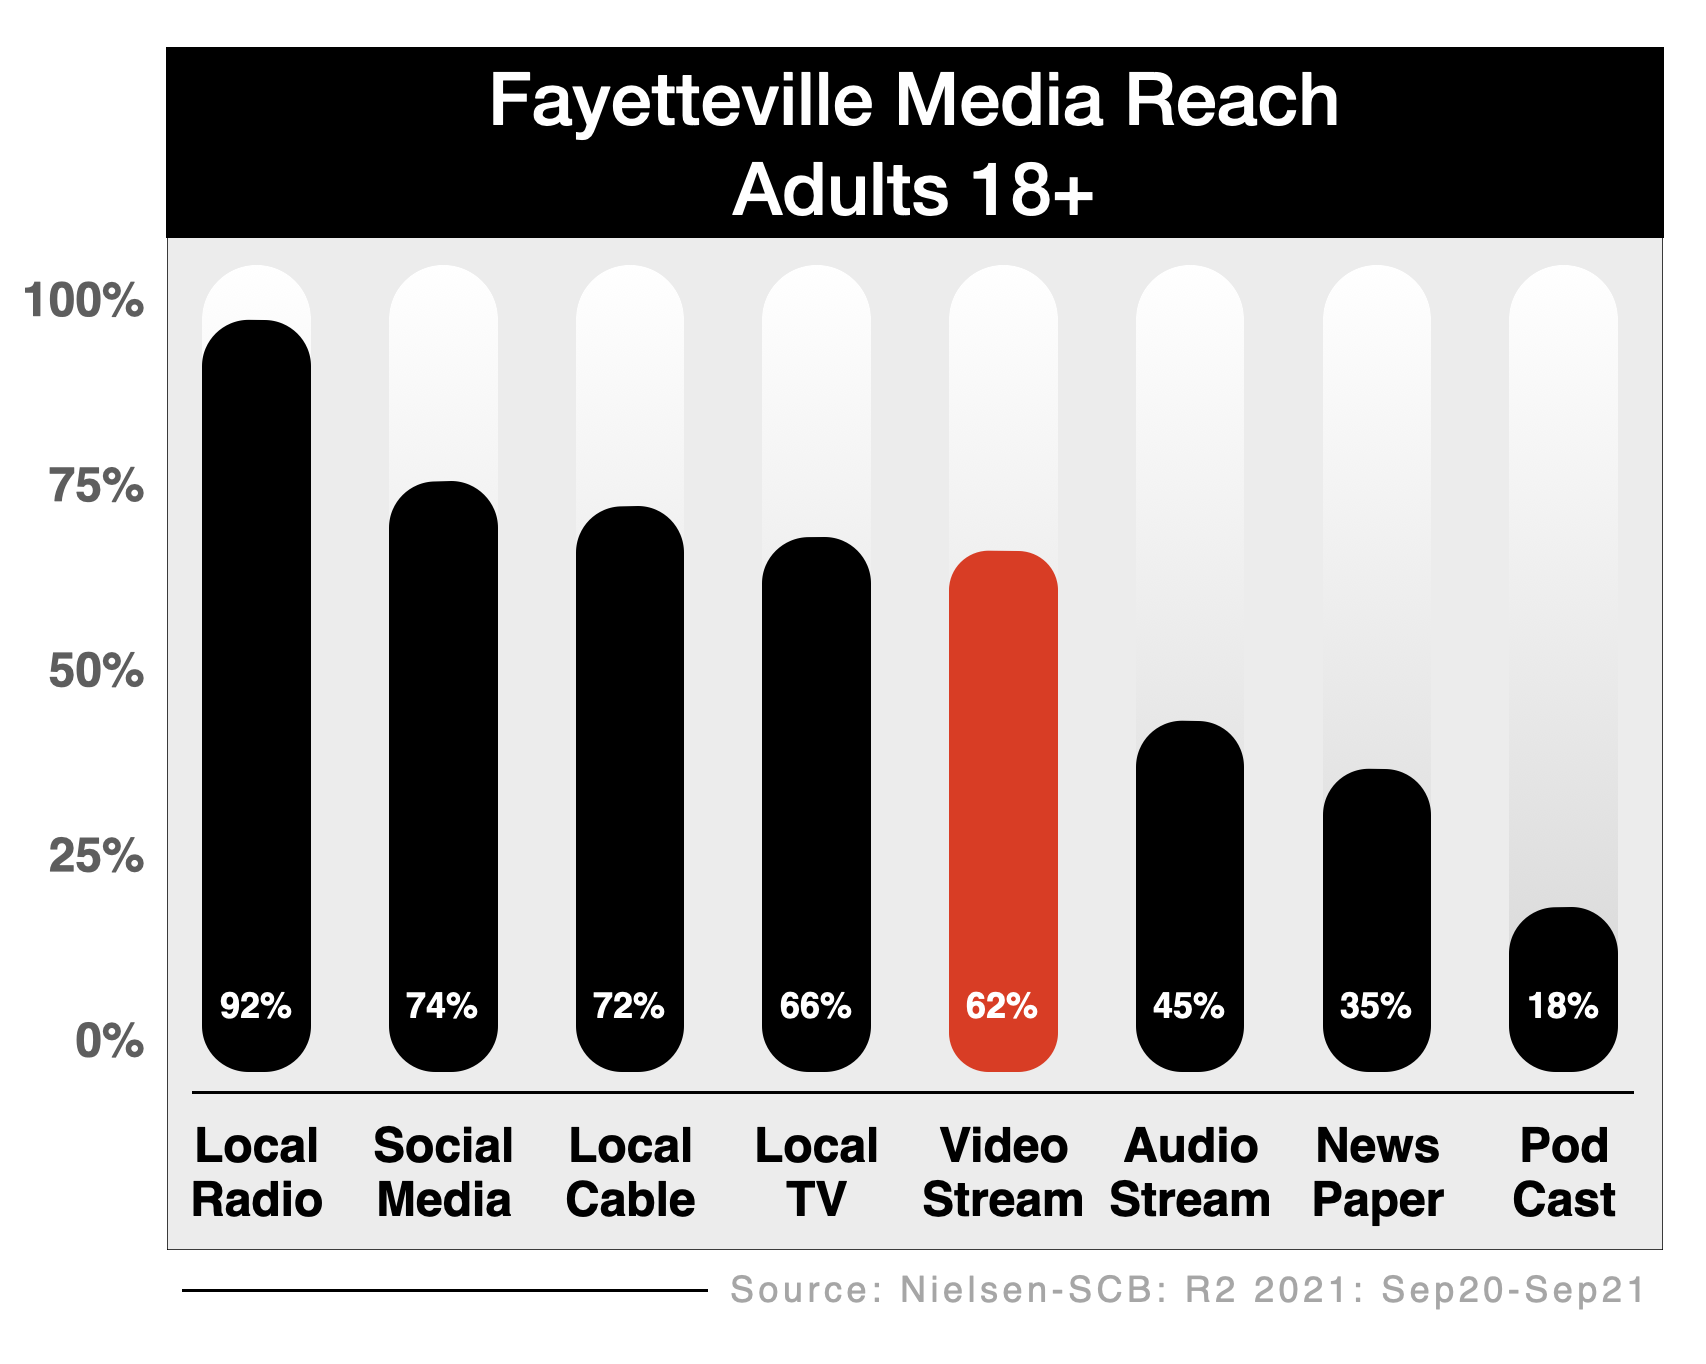 Television Advertising Options In Fayetteville OTT, CTV, Streaming